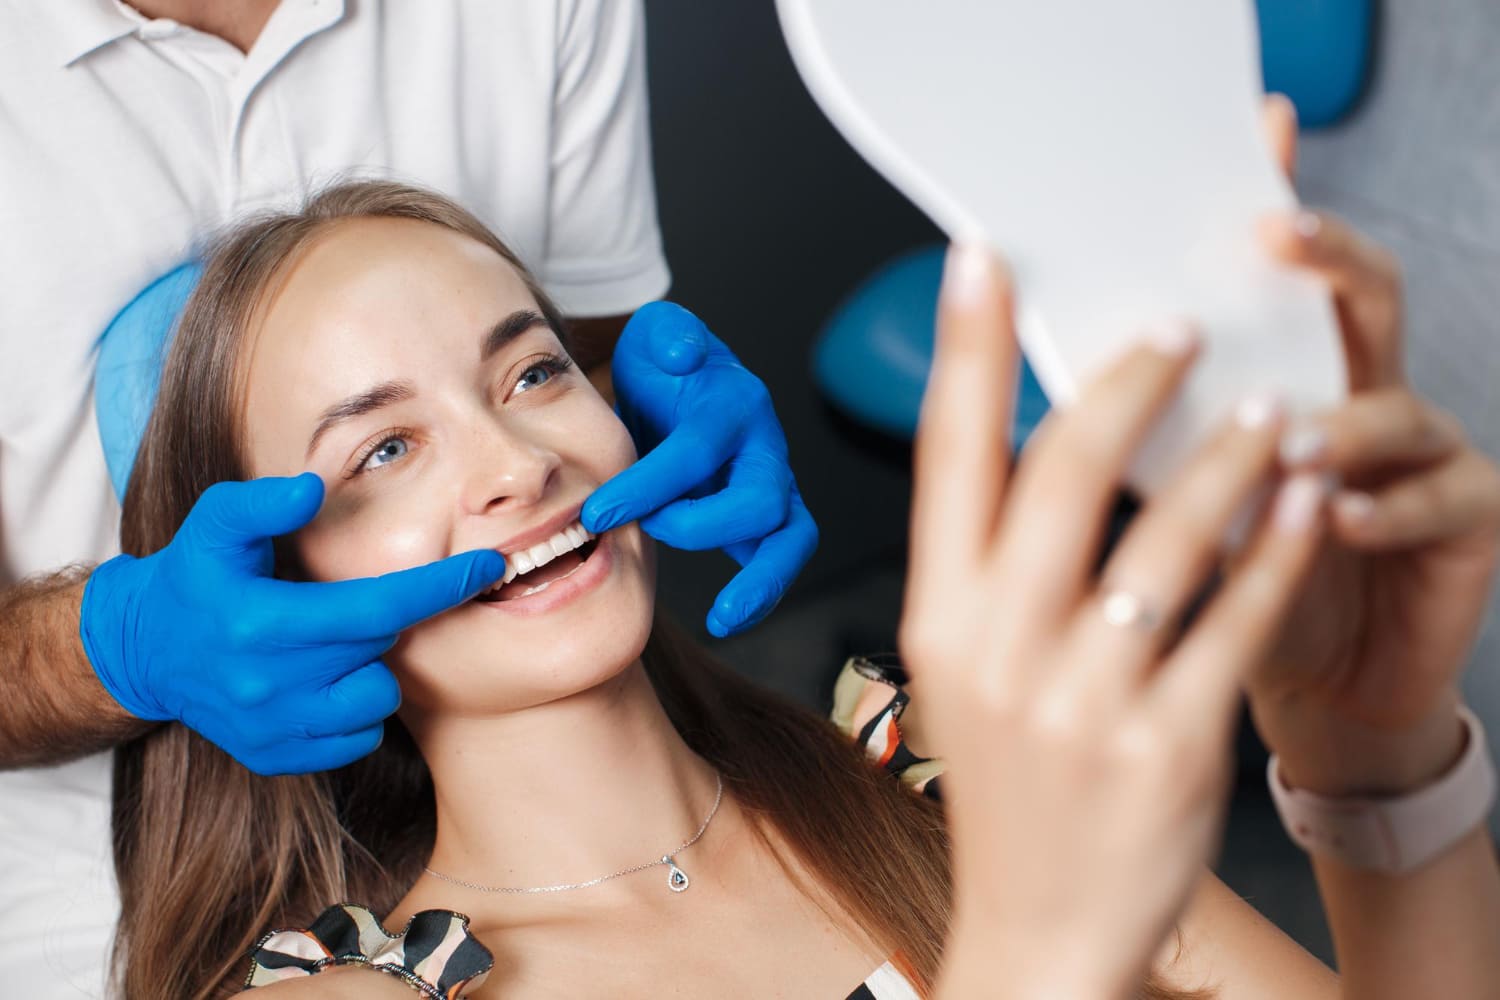 Smile-worthy Social Media Tactics for Dentists